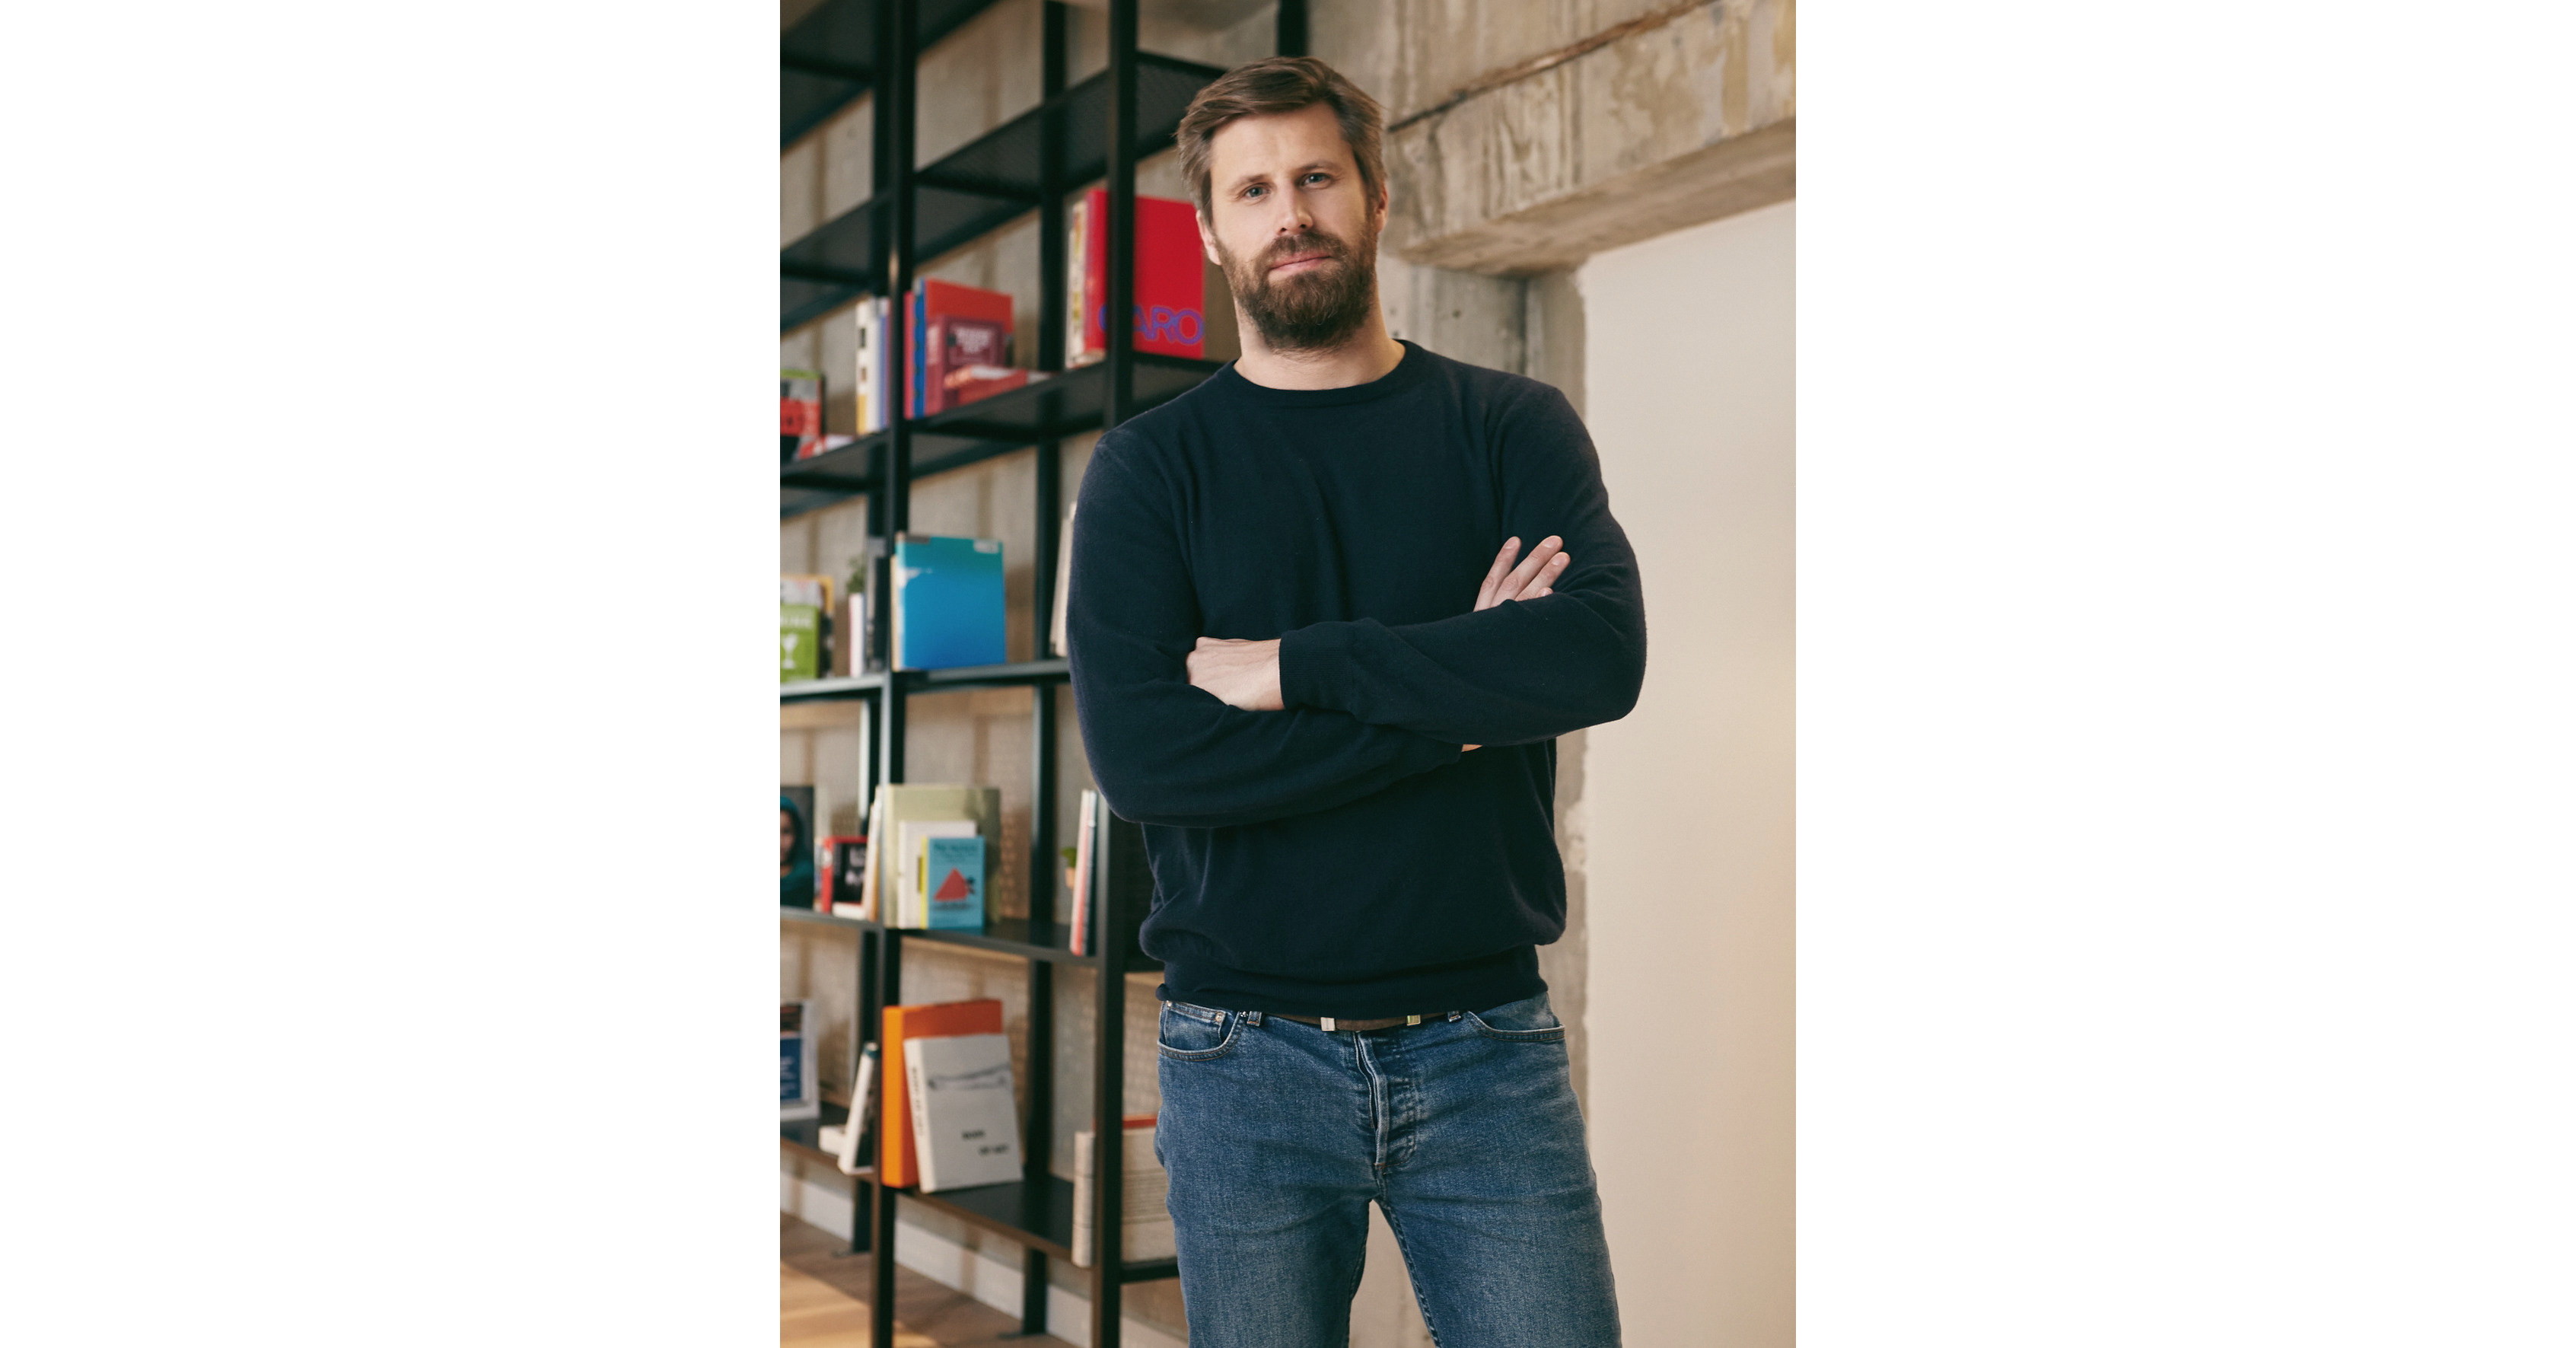 Vestiaire Collective raises €178M to accelerate growth and drive change for  a more sustainable fashion industry - Balderton Capital